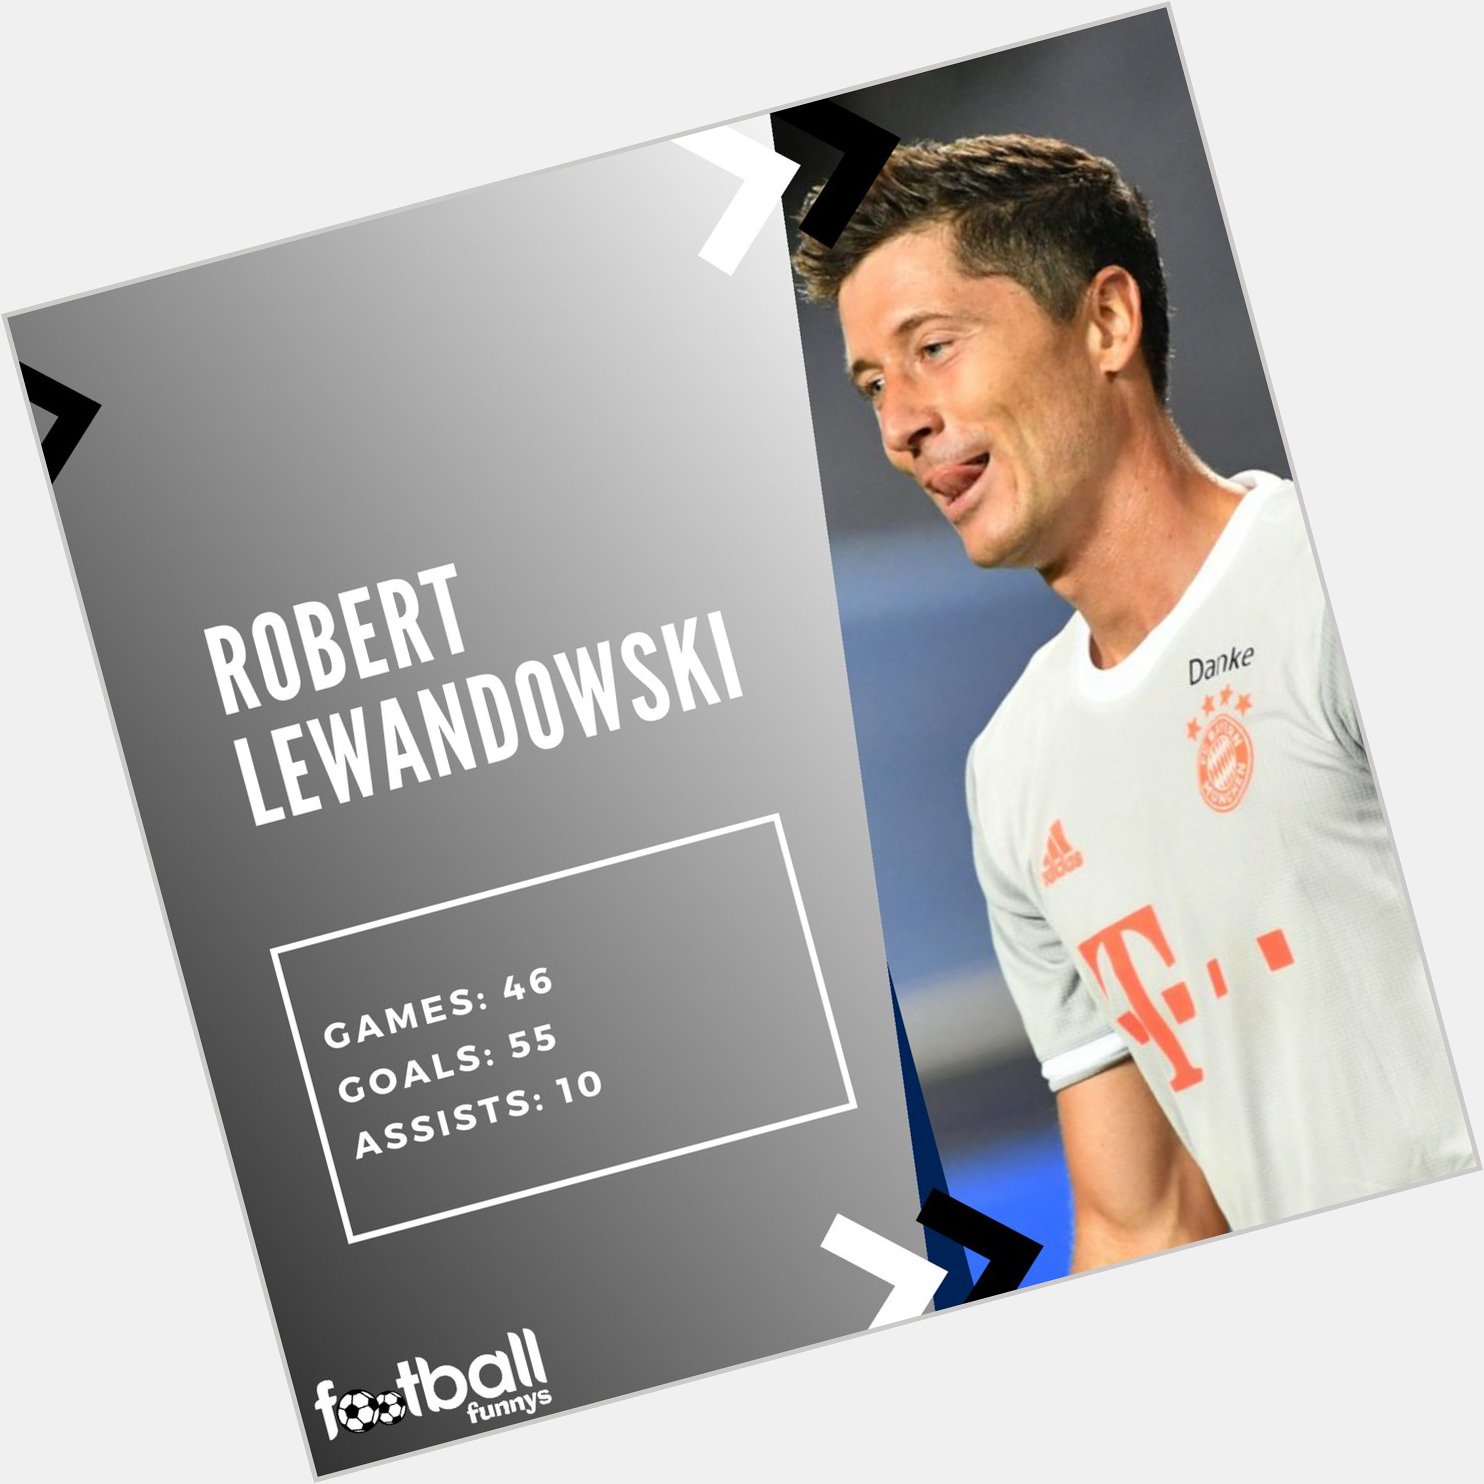 Happy Birthday to Robert Lewandowski, one of the greatest strikers of all time! 